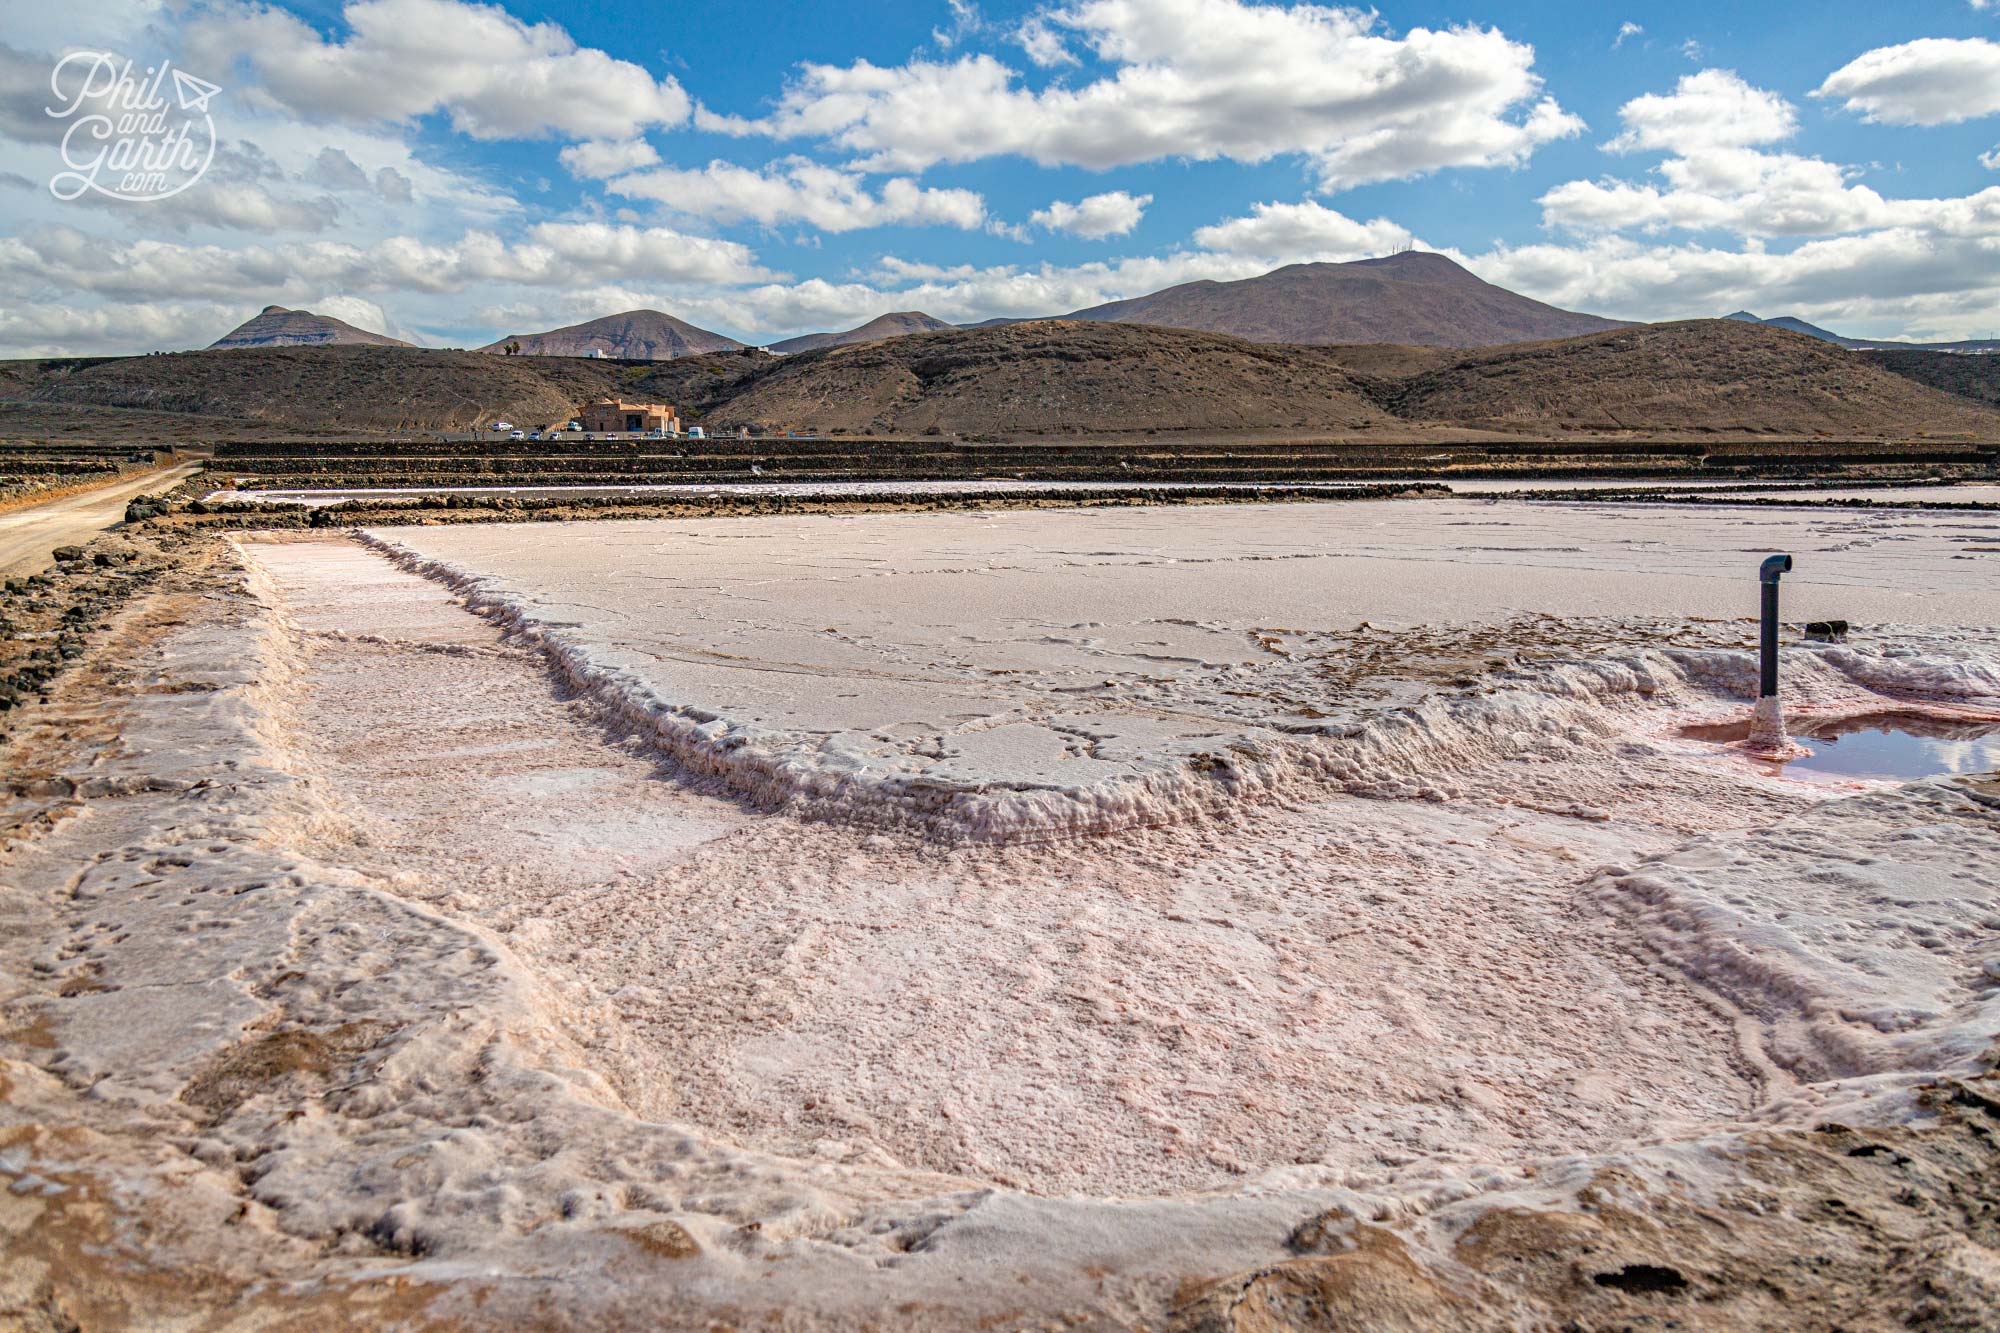 The salt flats are owned by a couple of different families